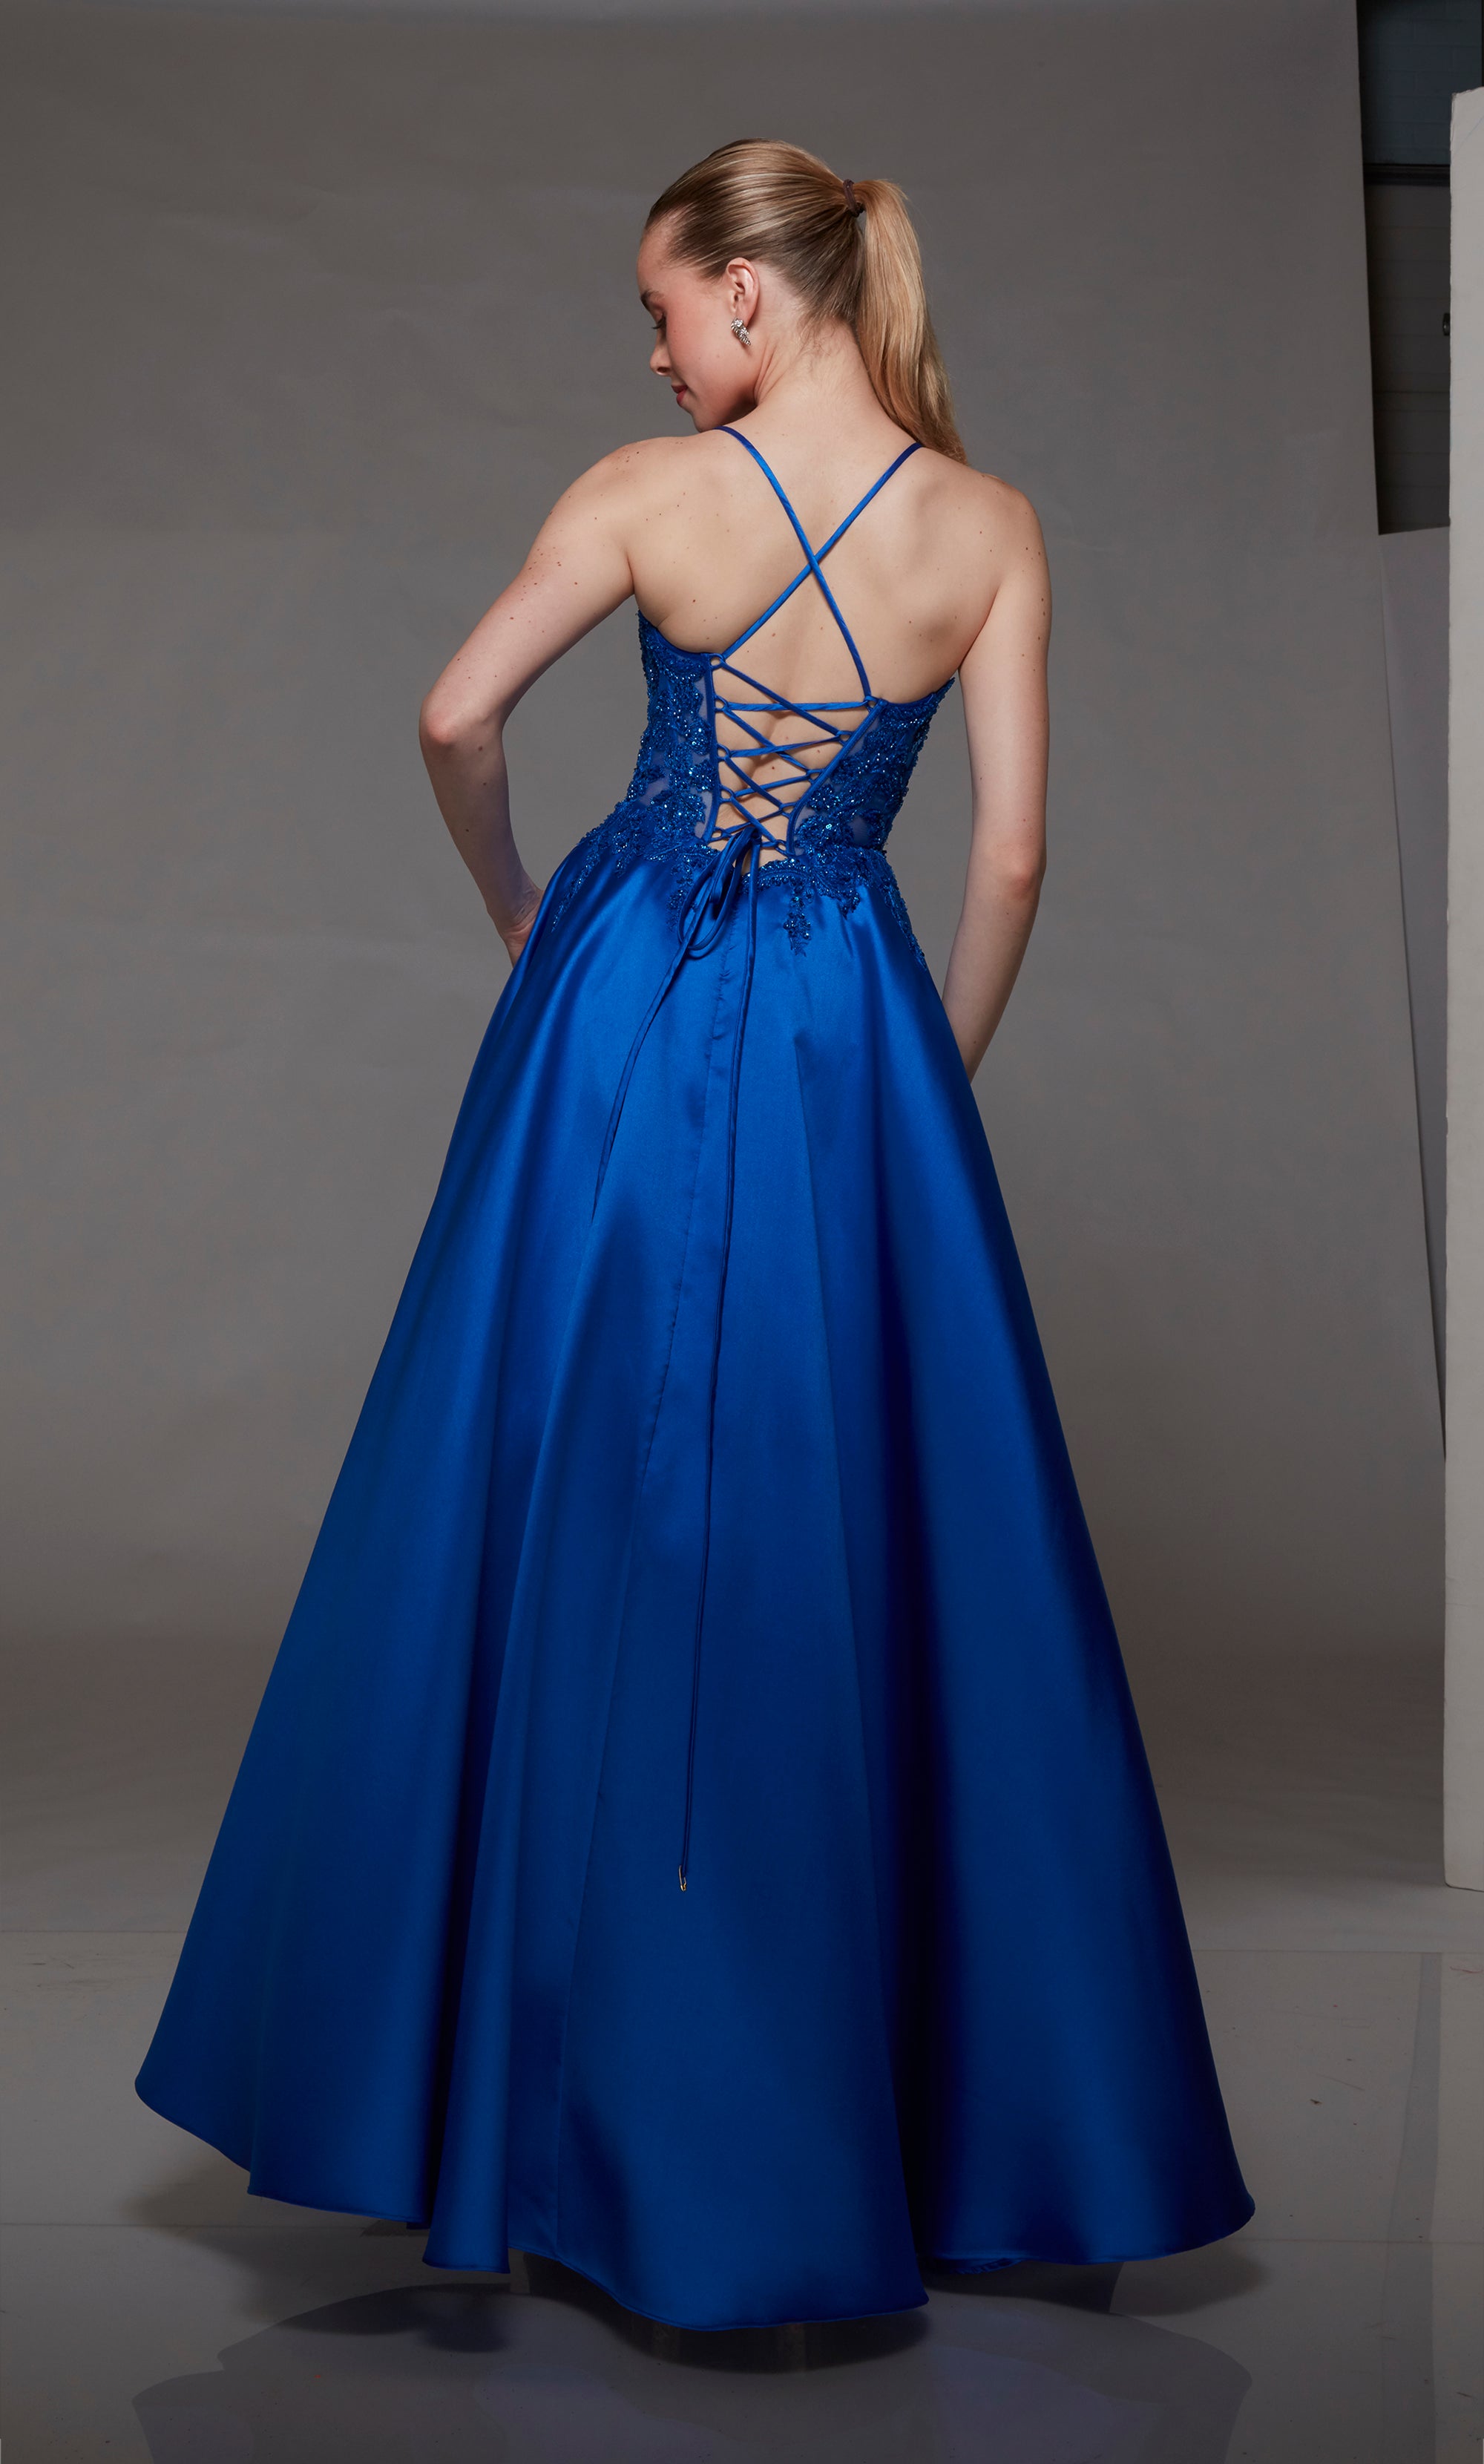 Embellished Long Corset Prom Dress with Lace-Up Back